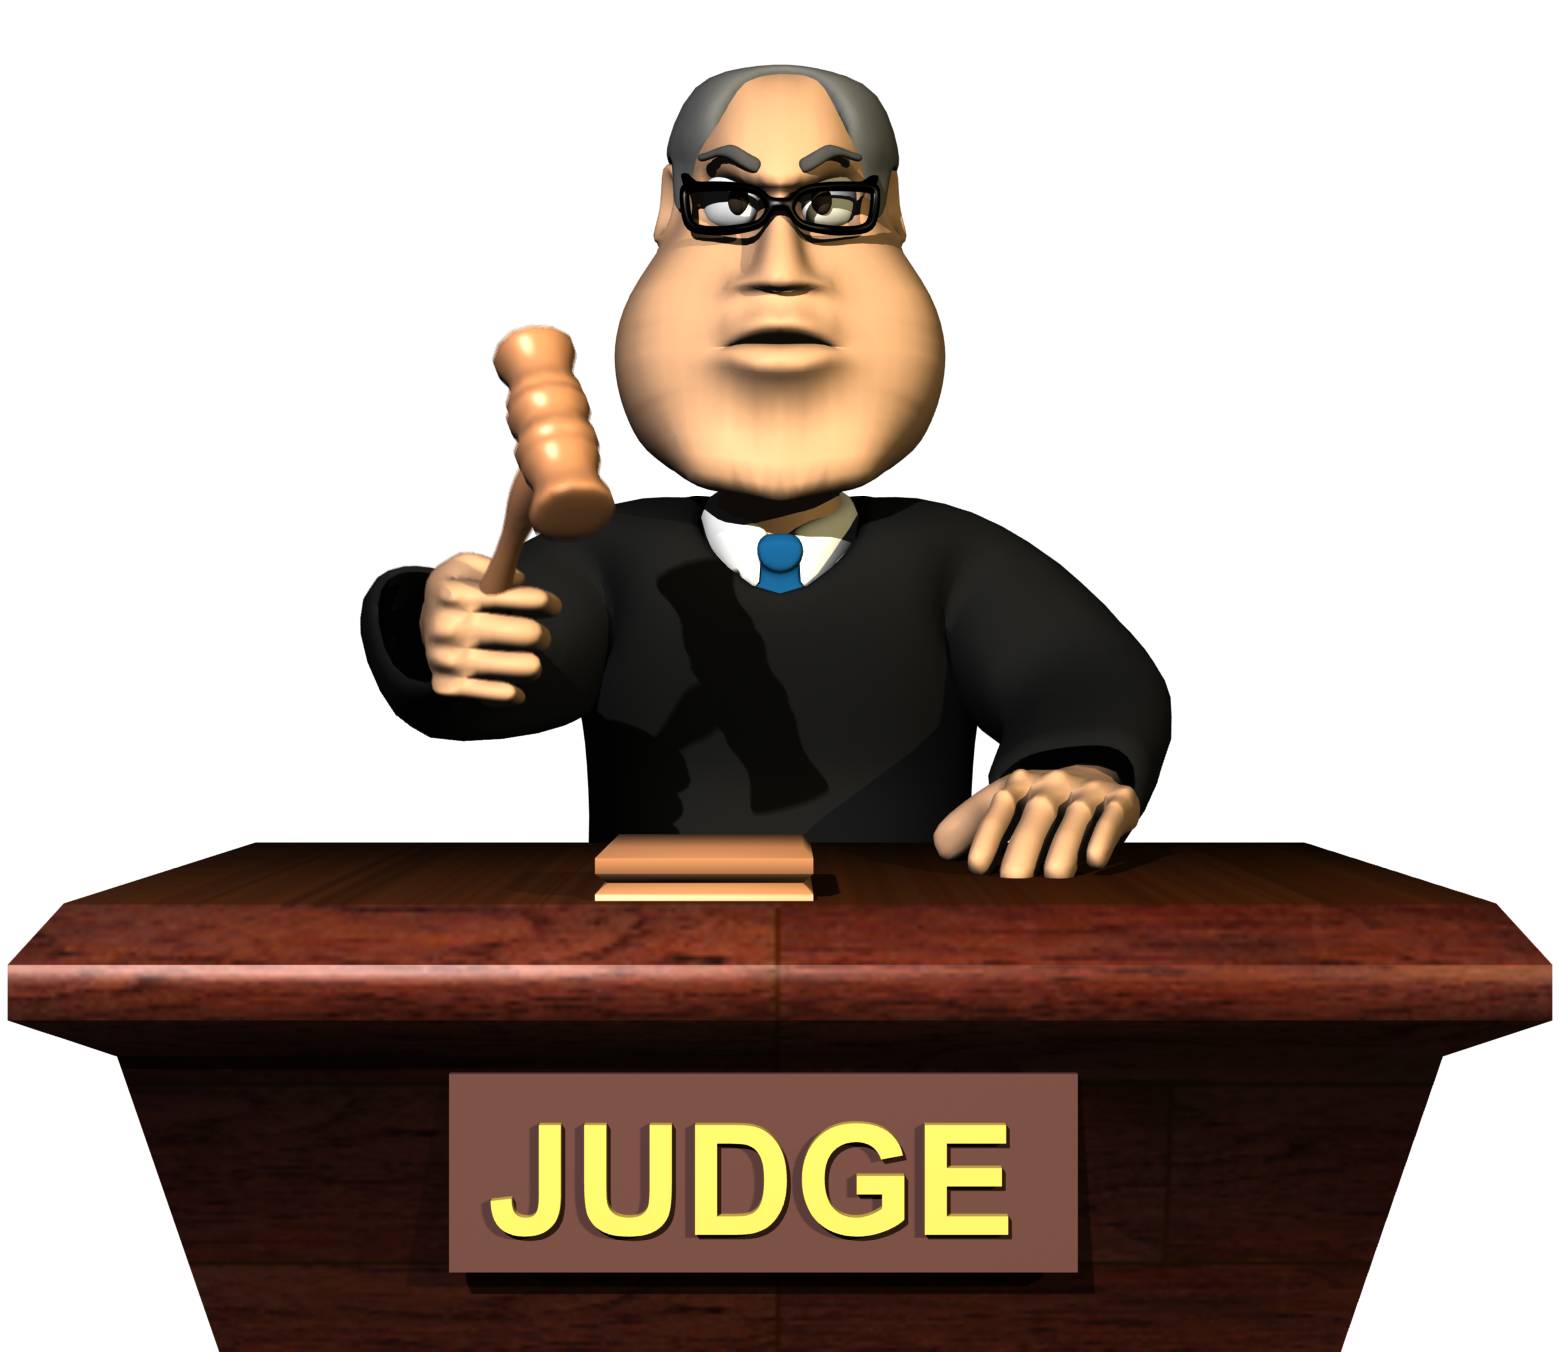 clipart of a judge - photo #43